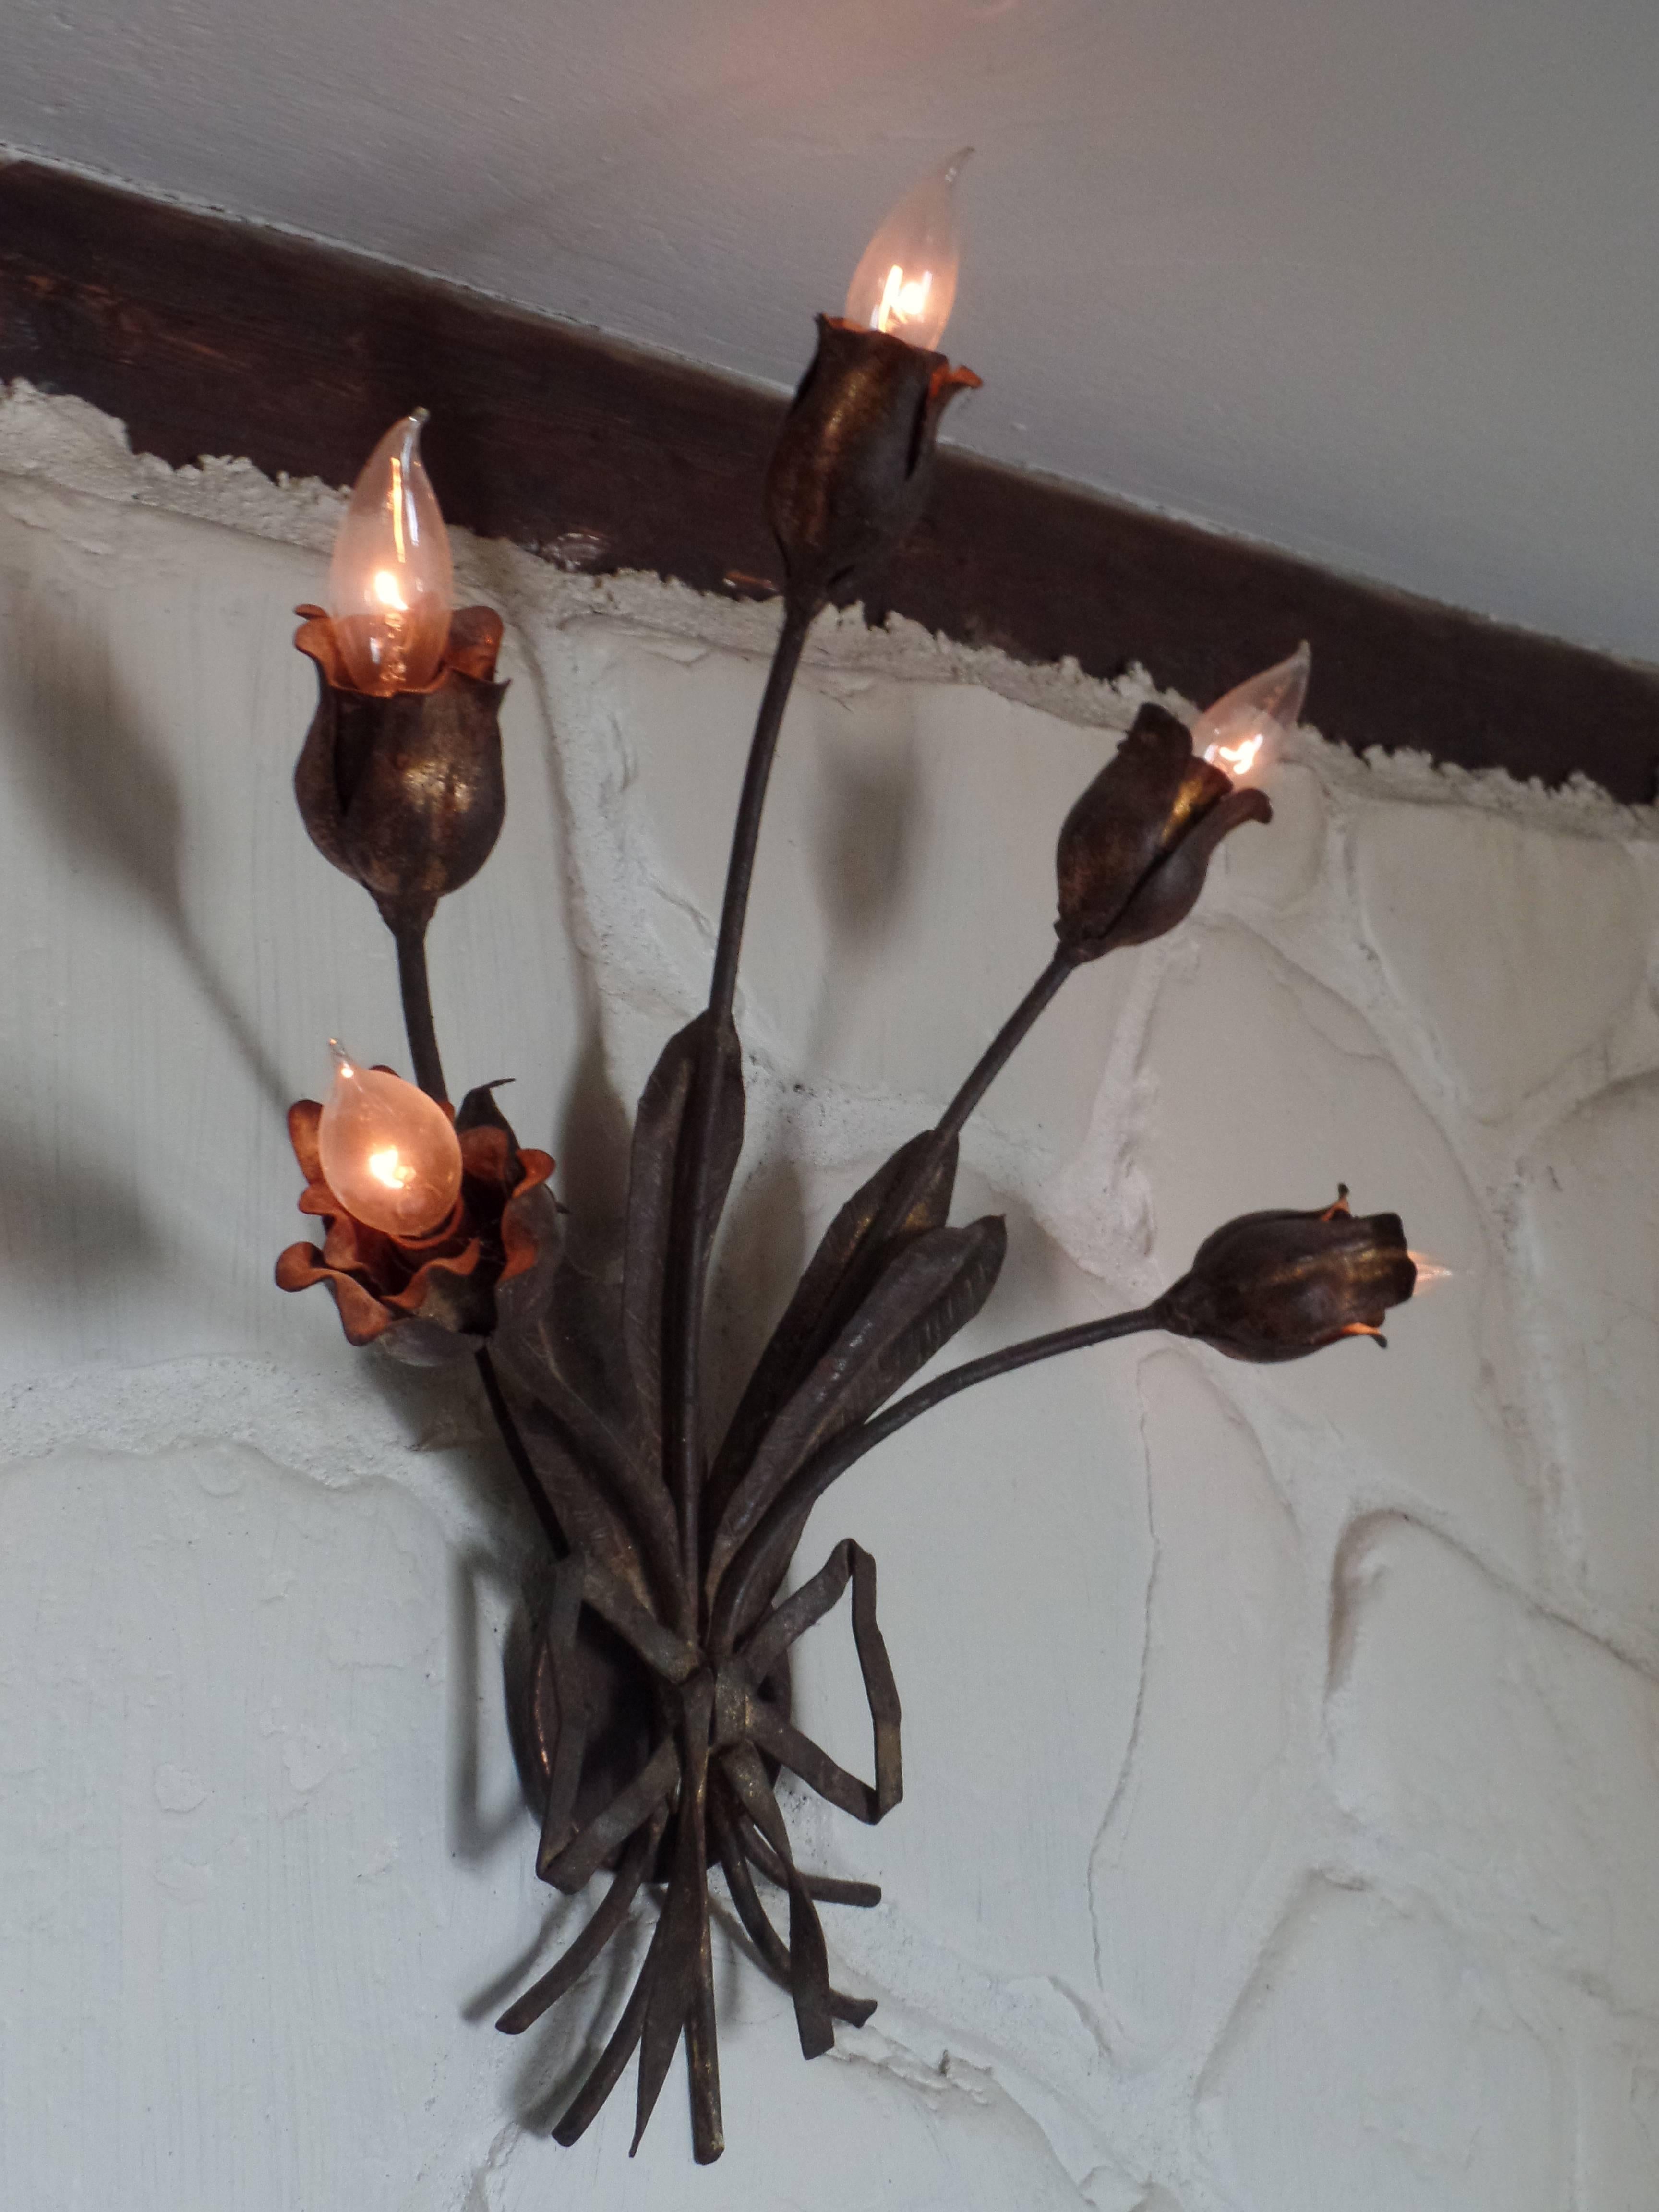 An Exquisite Pair of French Mid-Century Modern (1940 period) partially gilt wrought iron sconces attributed to Maison Bagues.

The pieces are hand-hammered and hand formed, and remarkably, the craftsmanship of the bouquet of flowers shows life